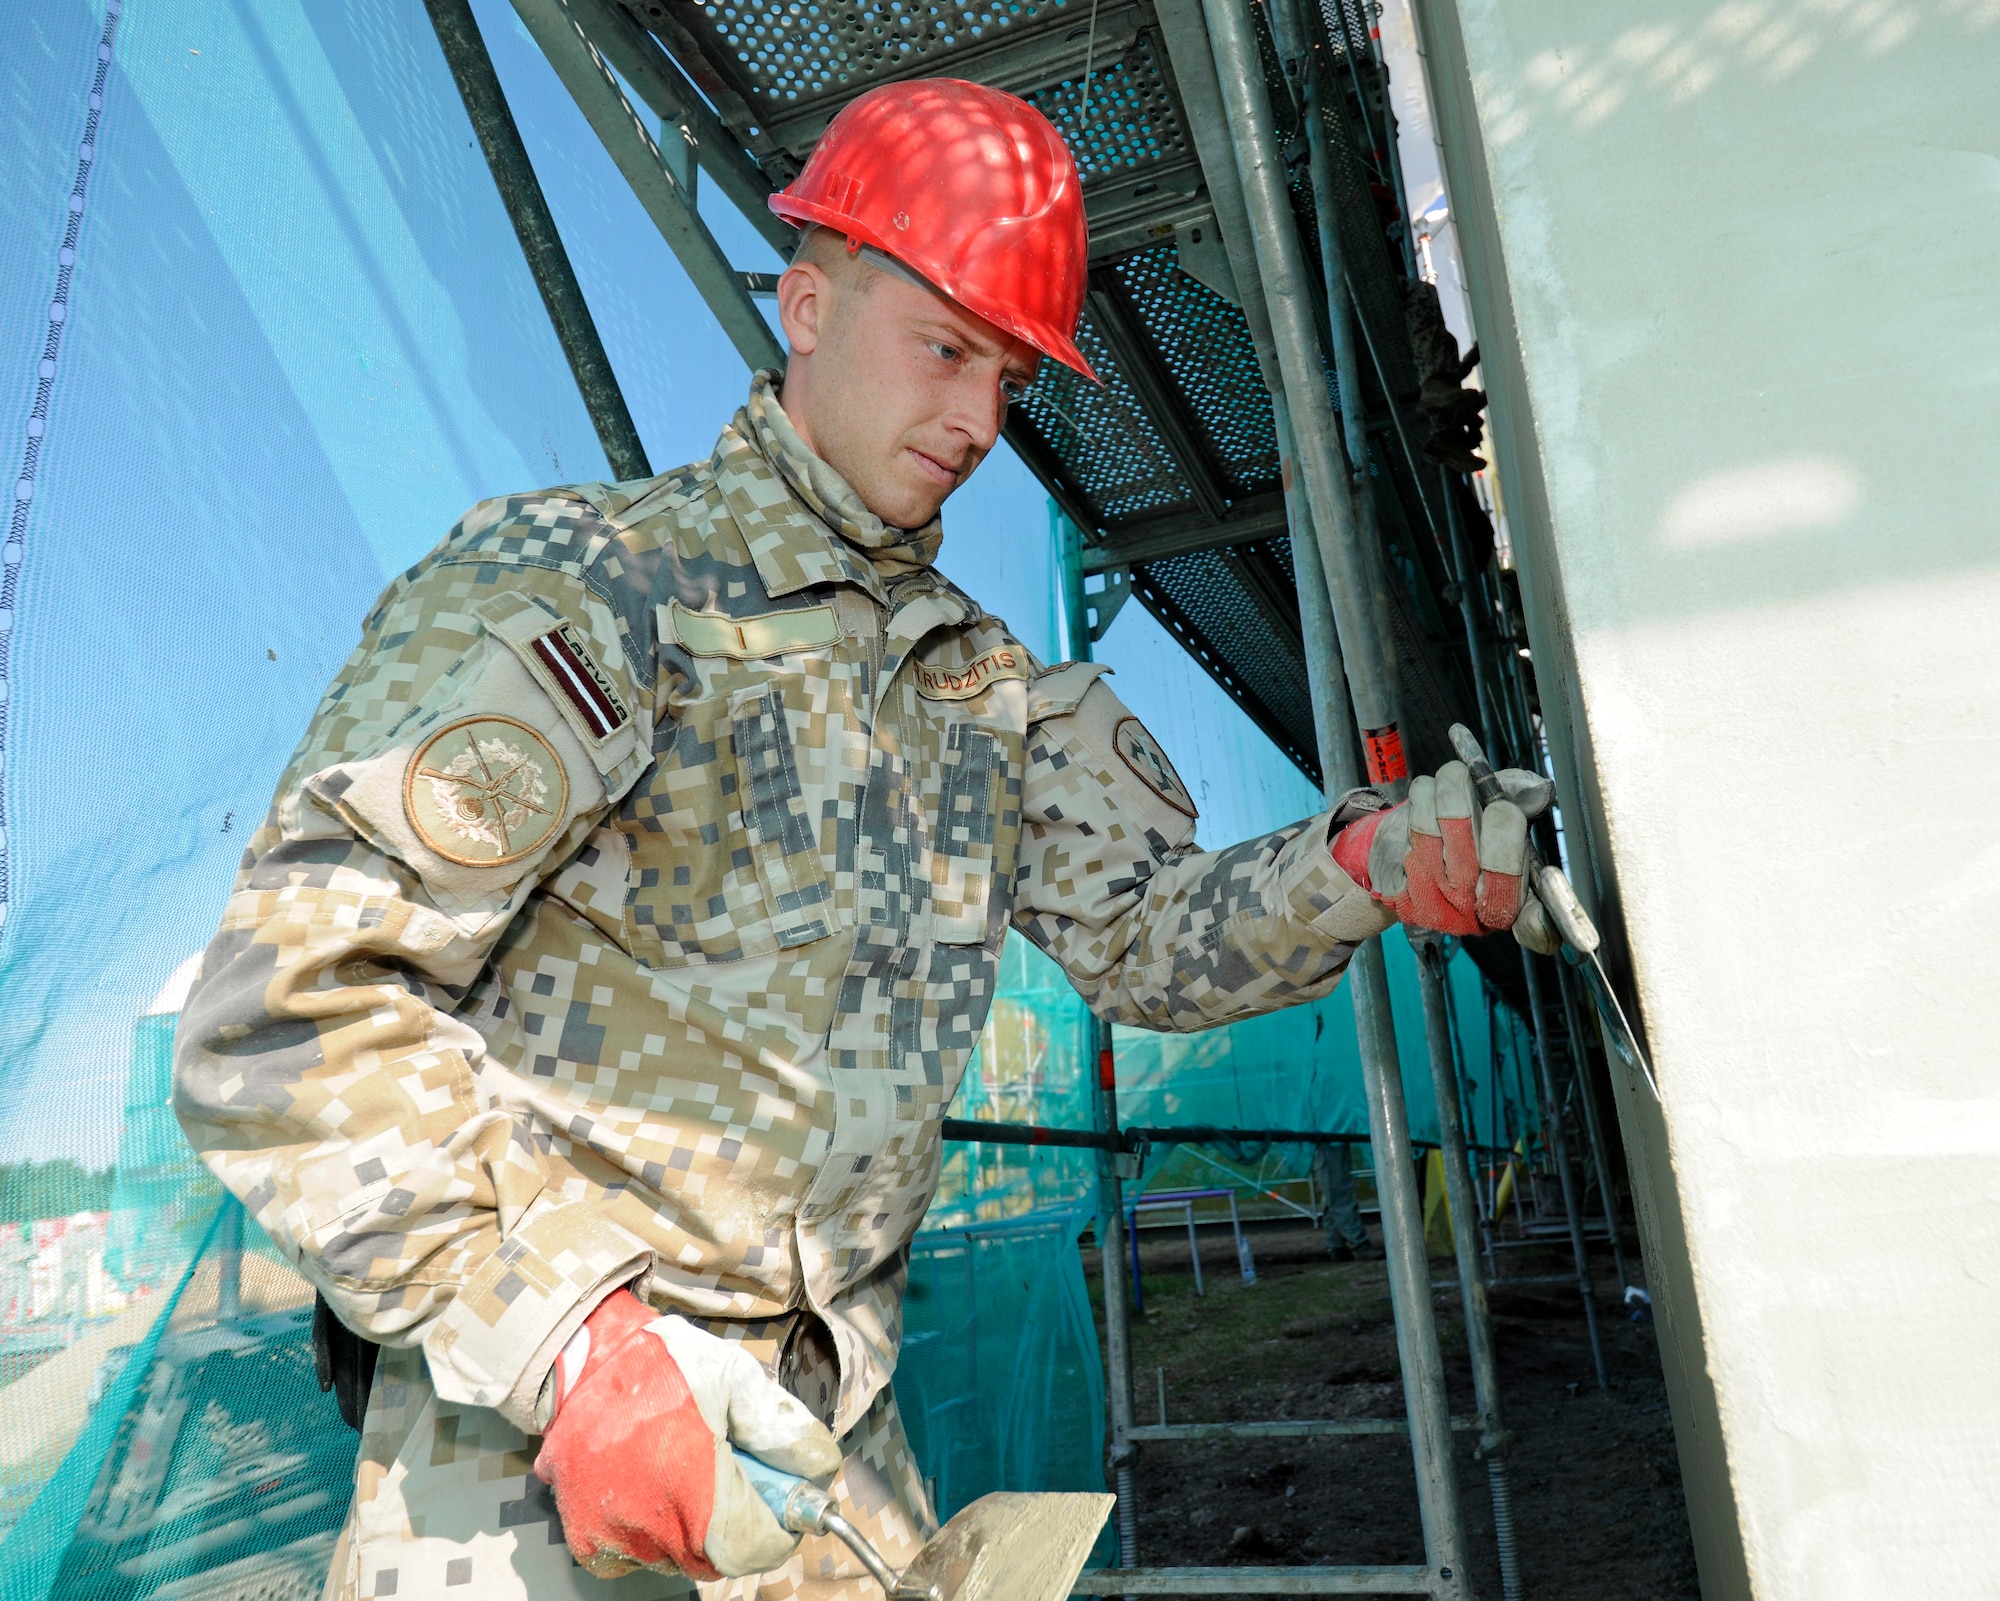 Private First Class Rihards Rudzitis, Latvian National Armed Forces, works on the side of a kindergarten building in Silmala, Latvia on June 19, 2016. The school is undergoing construction as part of the U.S. European Command’s Humanitarian Civic-Assistance project. United States and Latvian military engineers are working together to complete the project. (U.S. Air National Guard photo by Senior Airman Ryan Zeski)